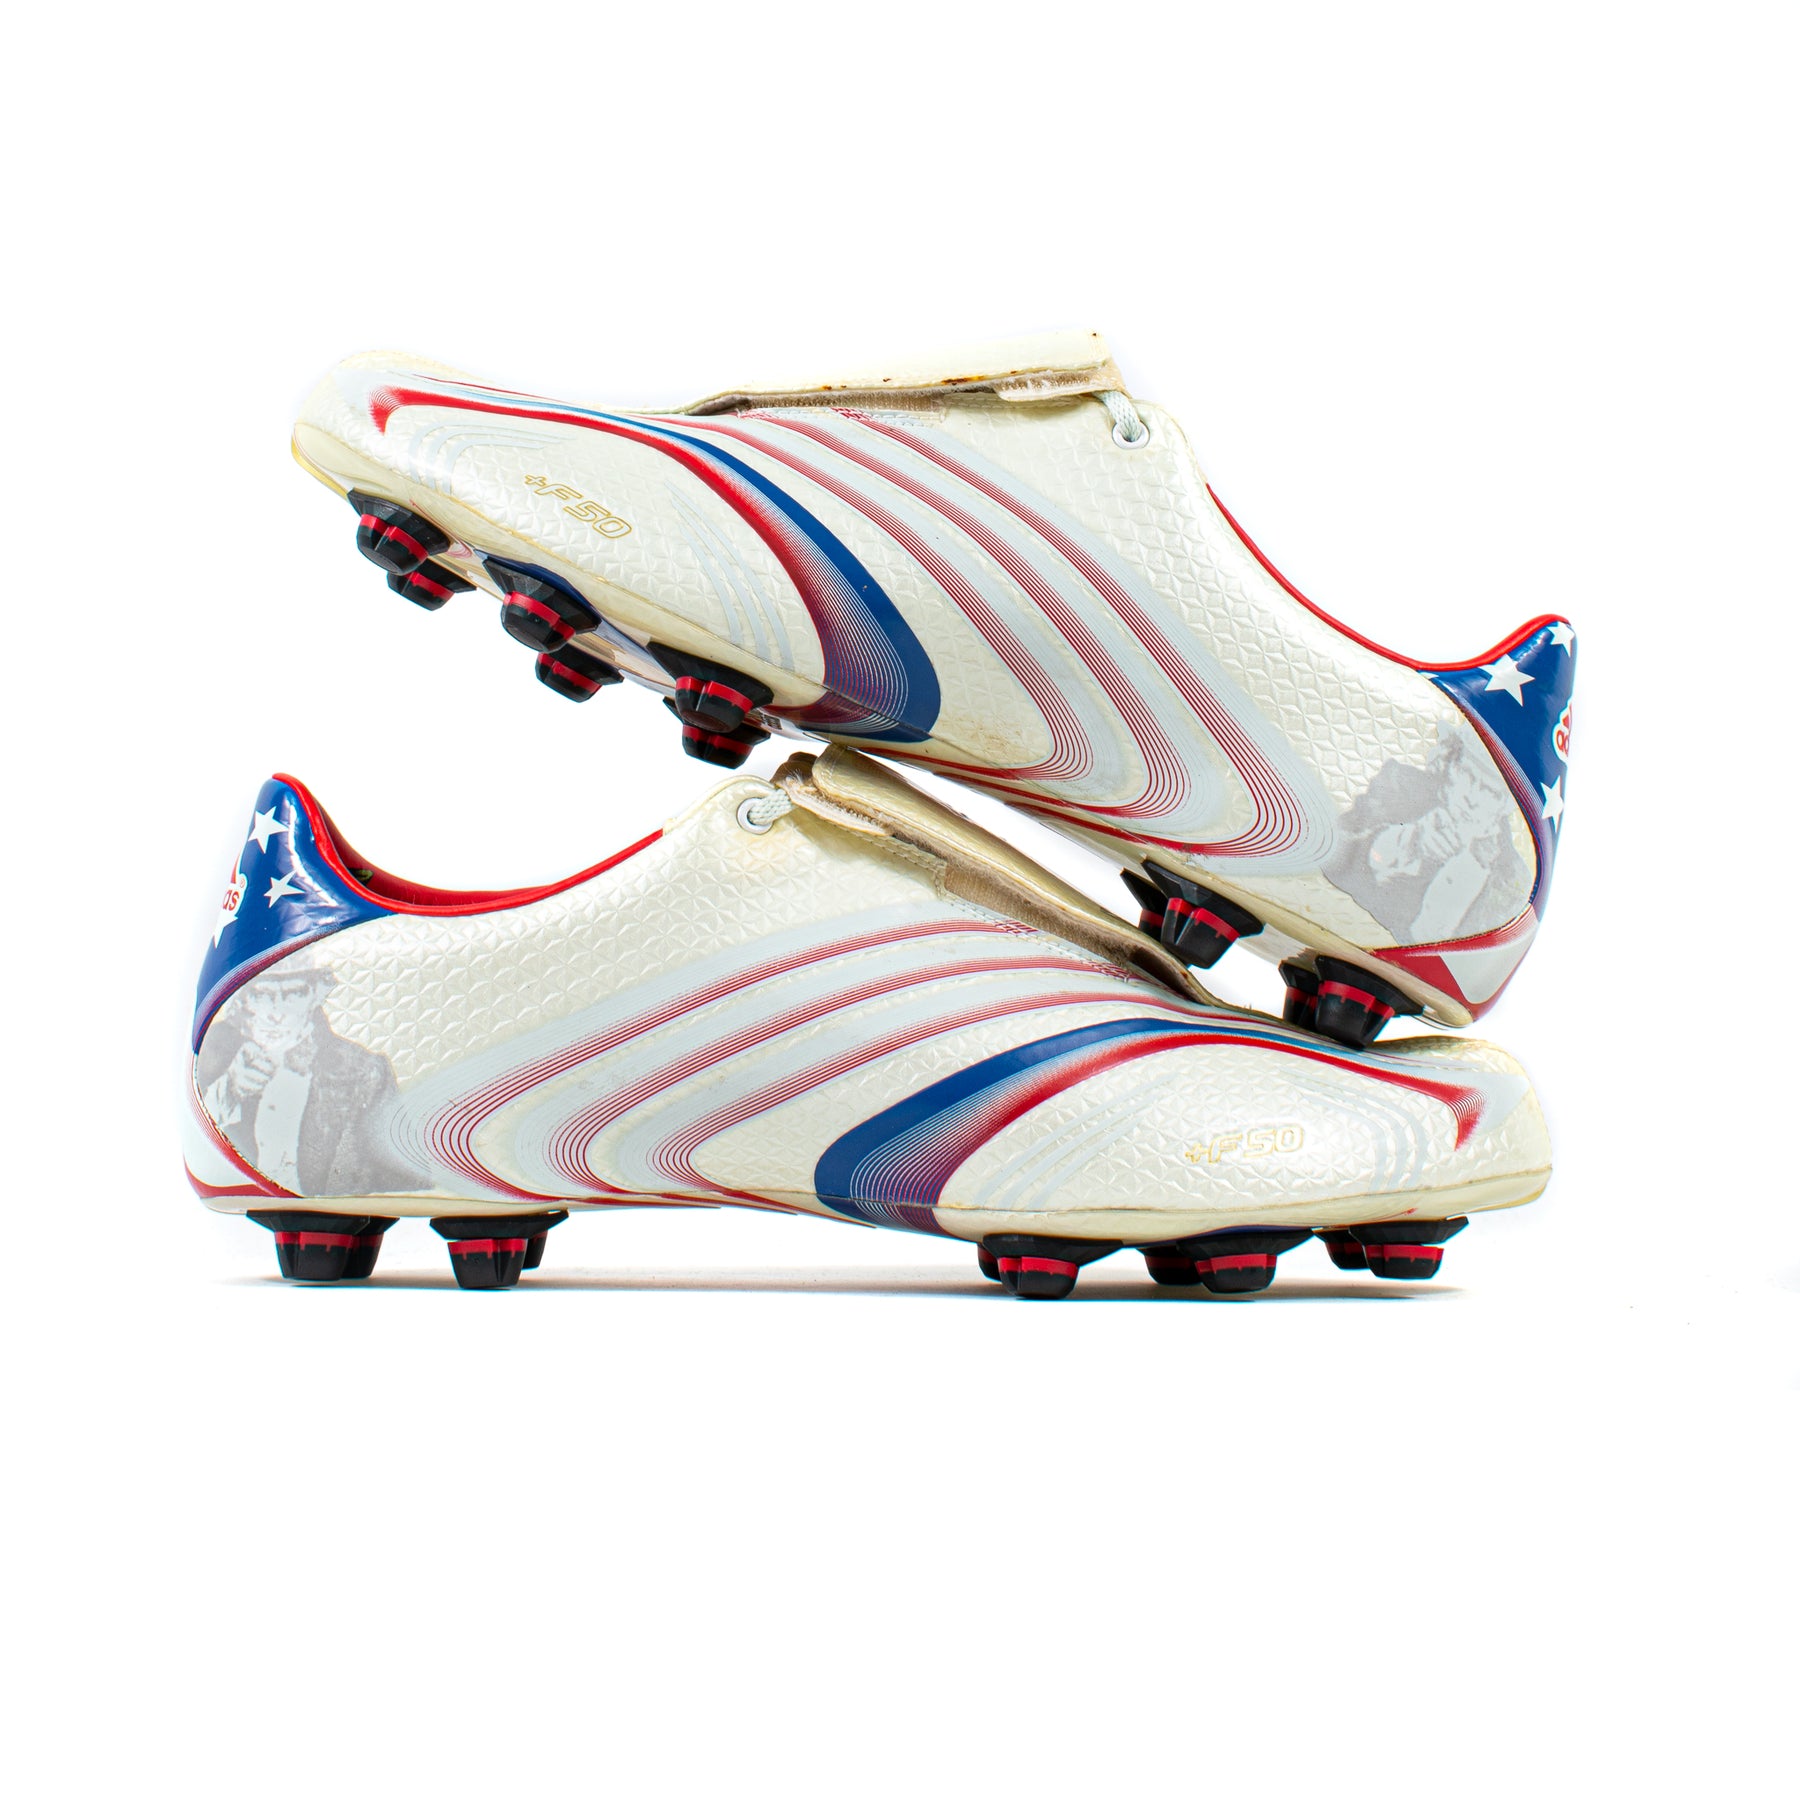 Adidas F50.6 Tunit USA 2006 World Cup Classic Soccer Cleats